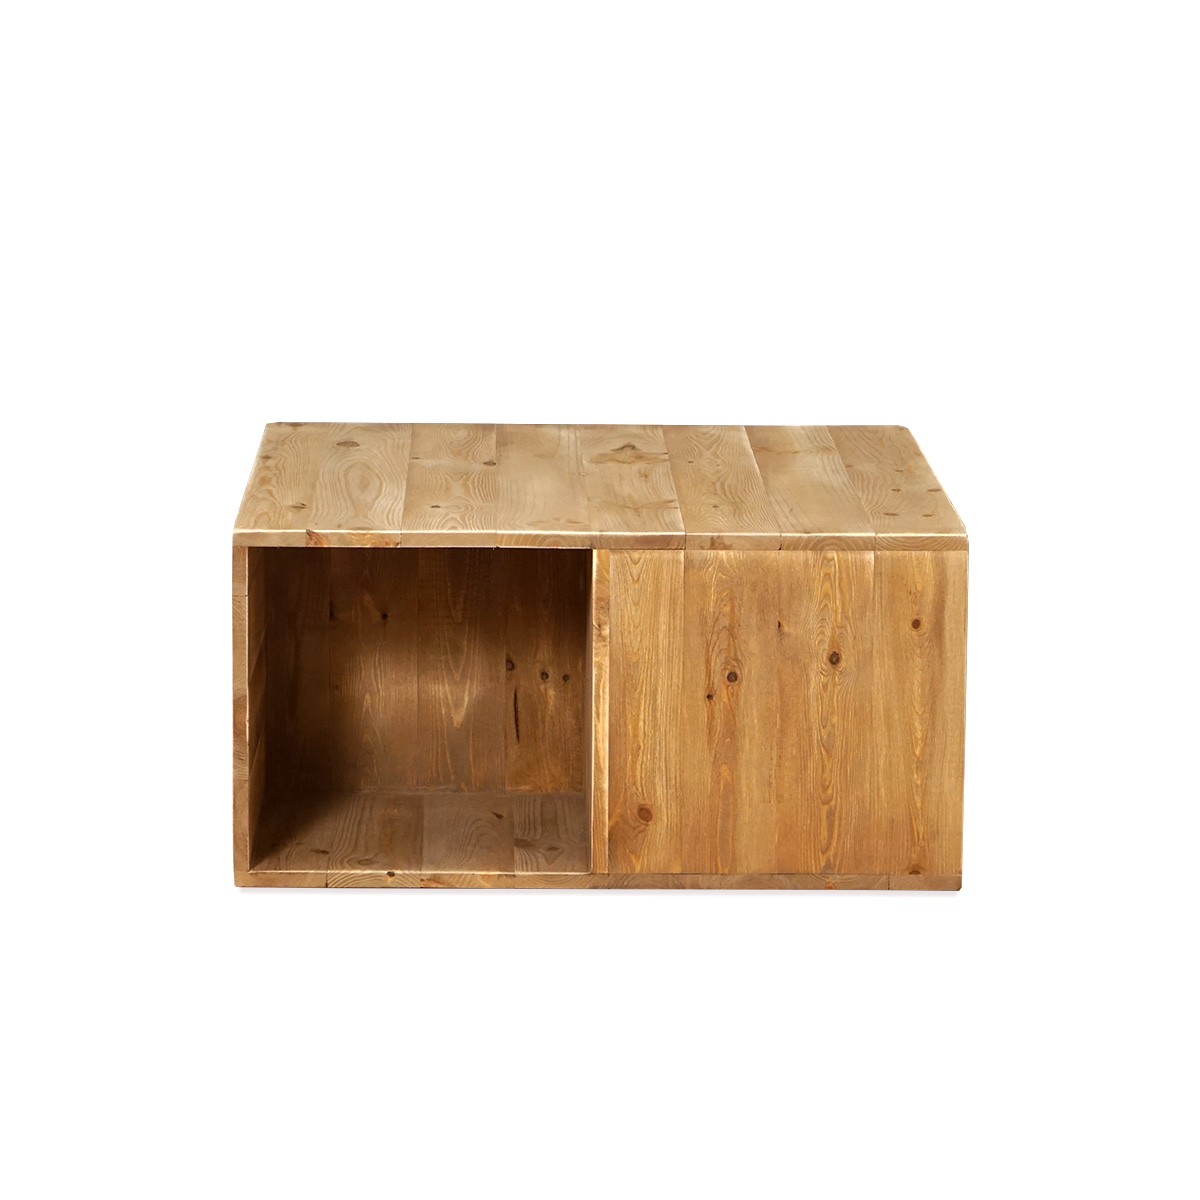 SUZANNE coffee table, 4 solid wood storage spaces